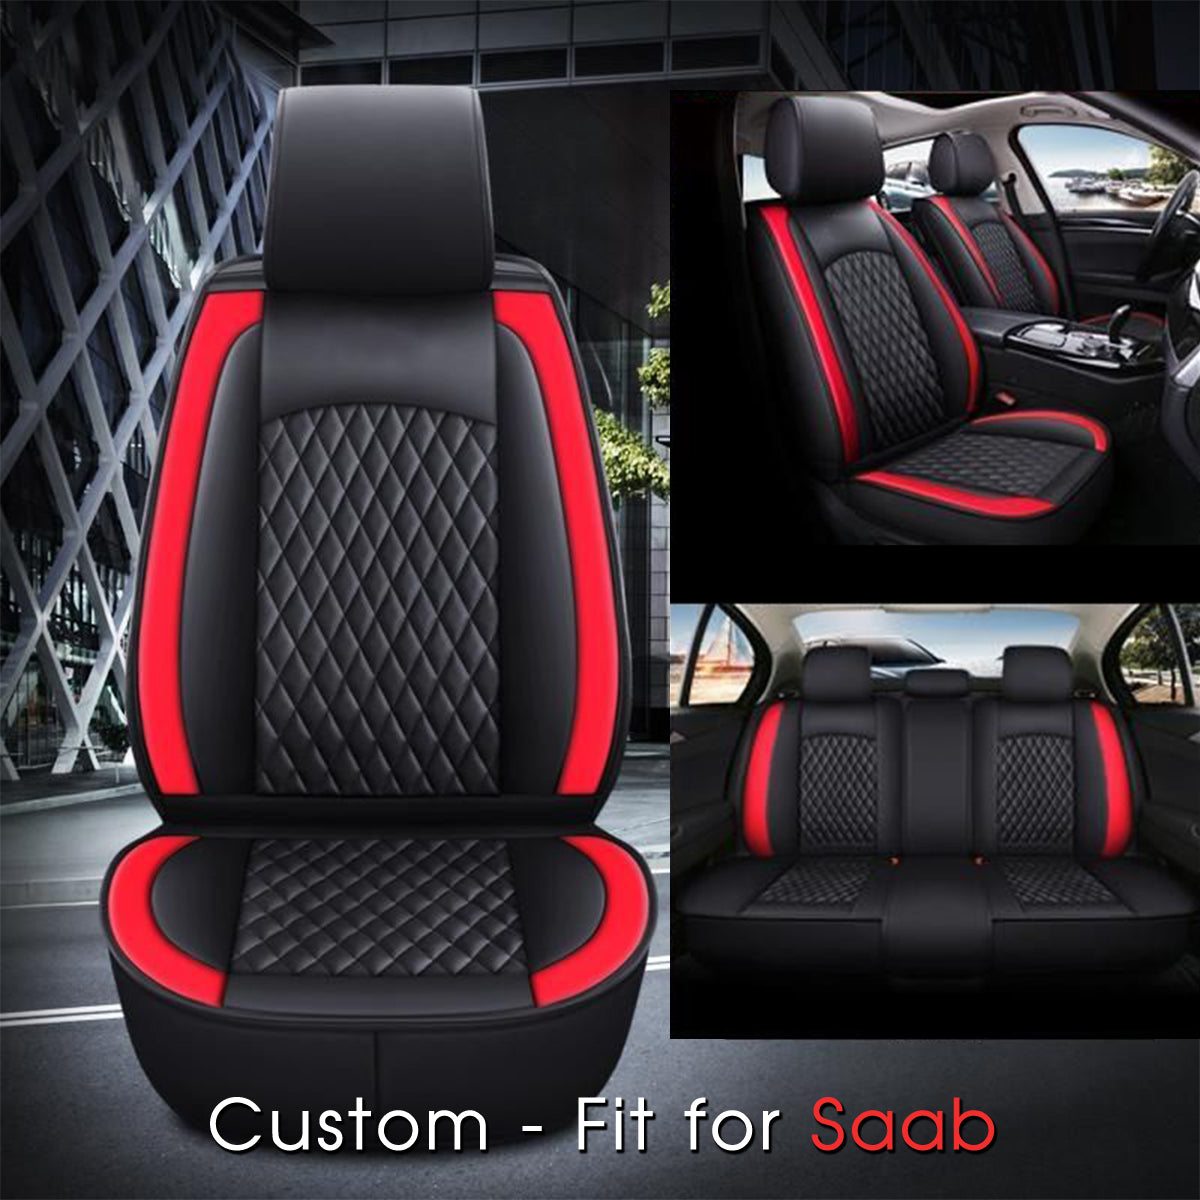 2 Car Seat Covers Full Set, Custom-Fit For Car, Waterproof Leather Front Rear Seat Automotive Protection Cushions, Car Accessories DLSU211